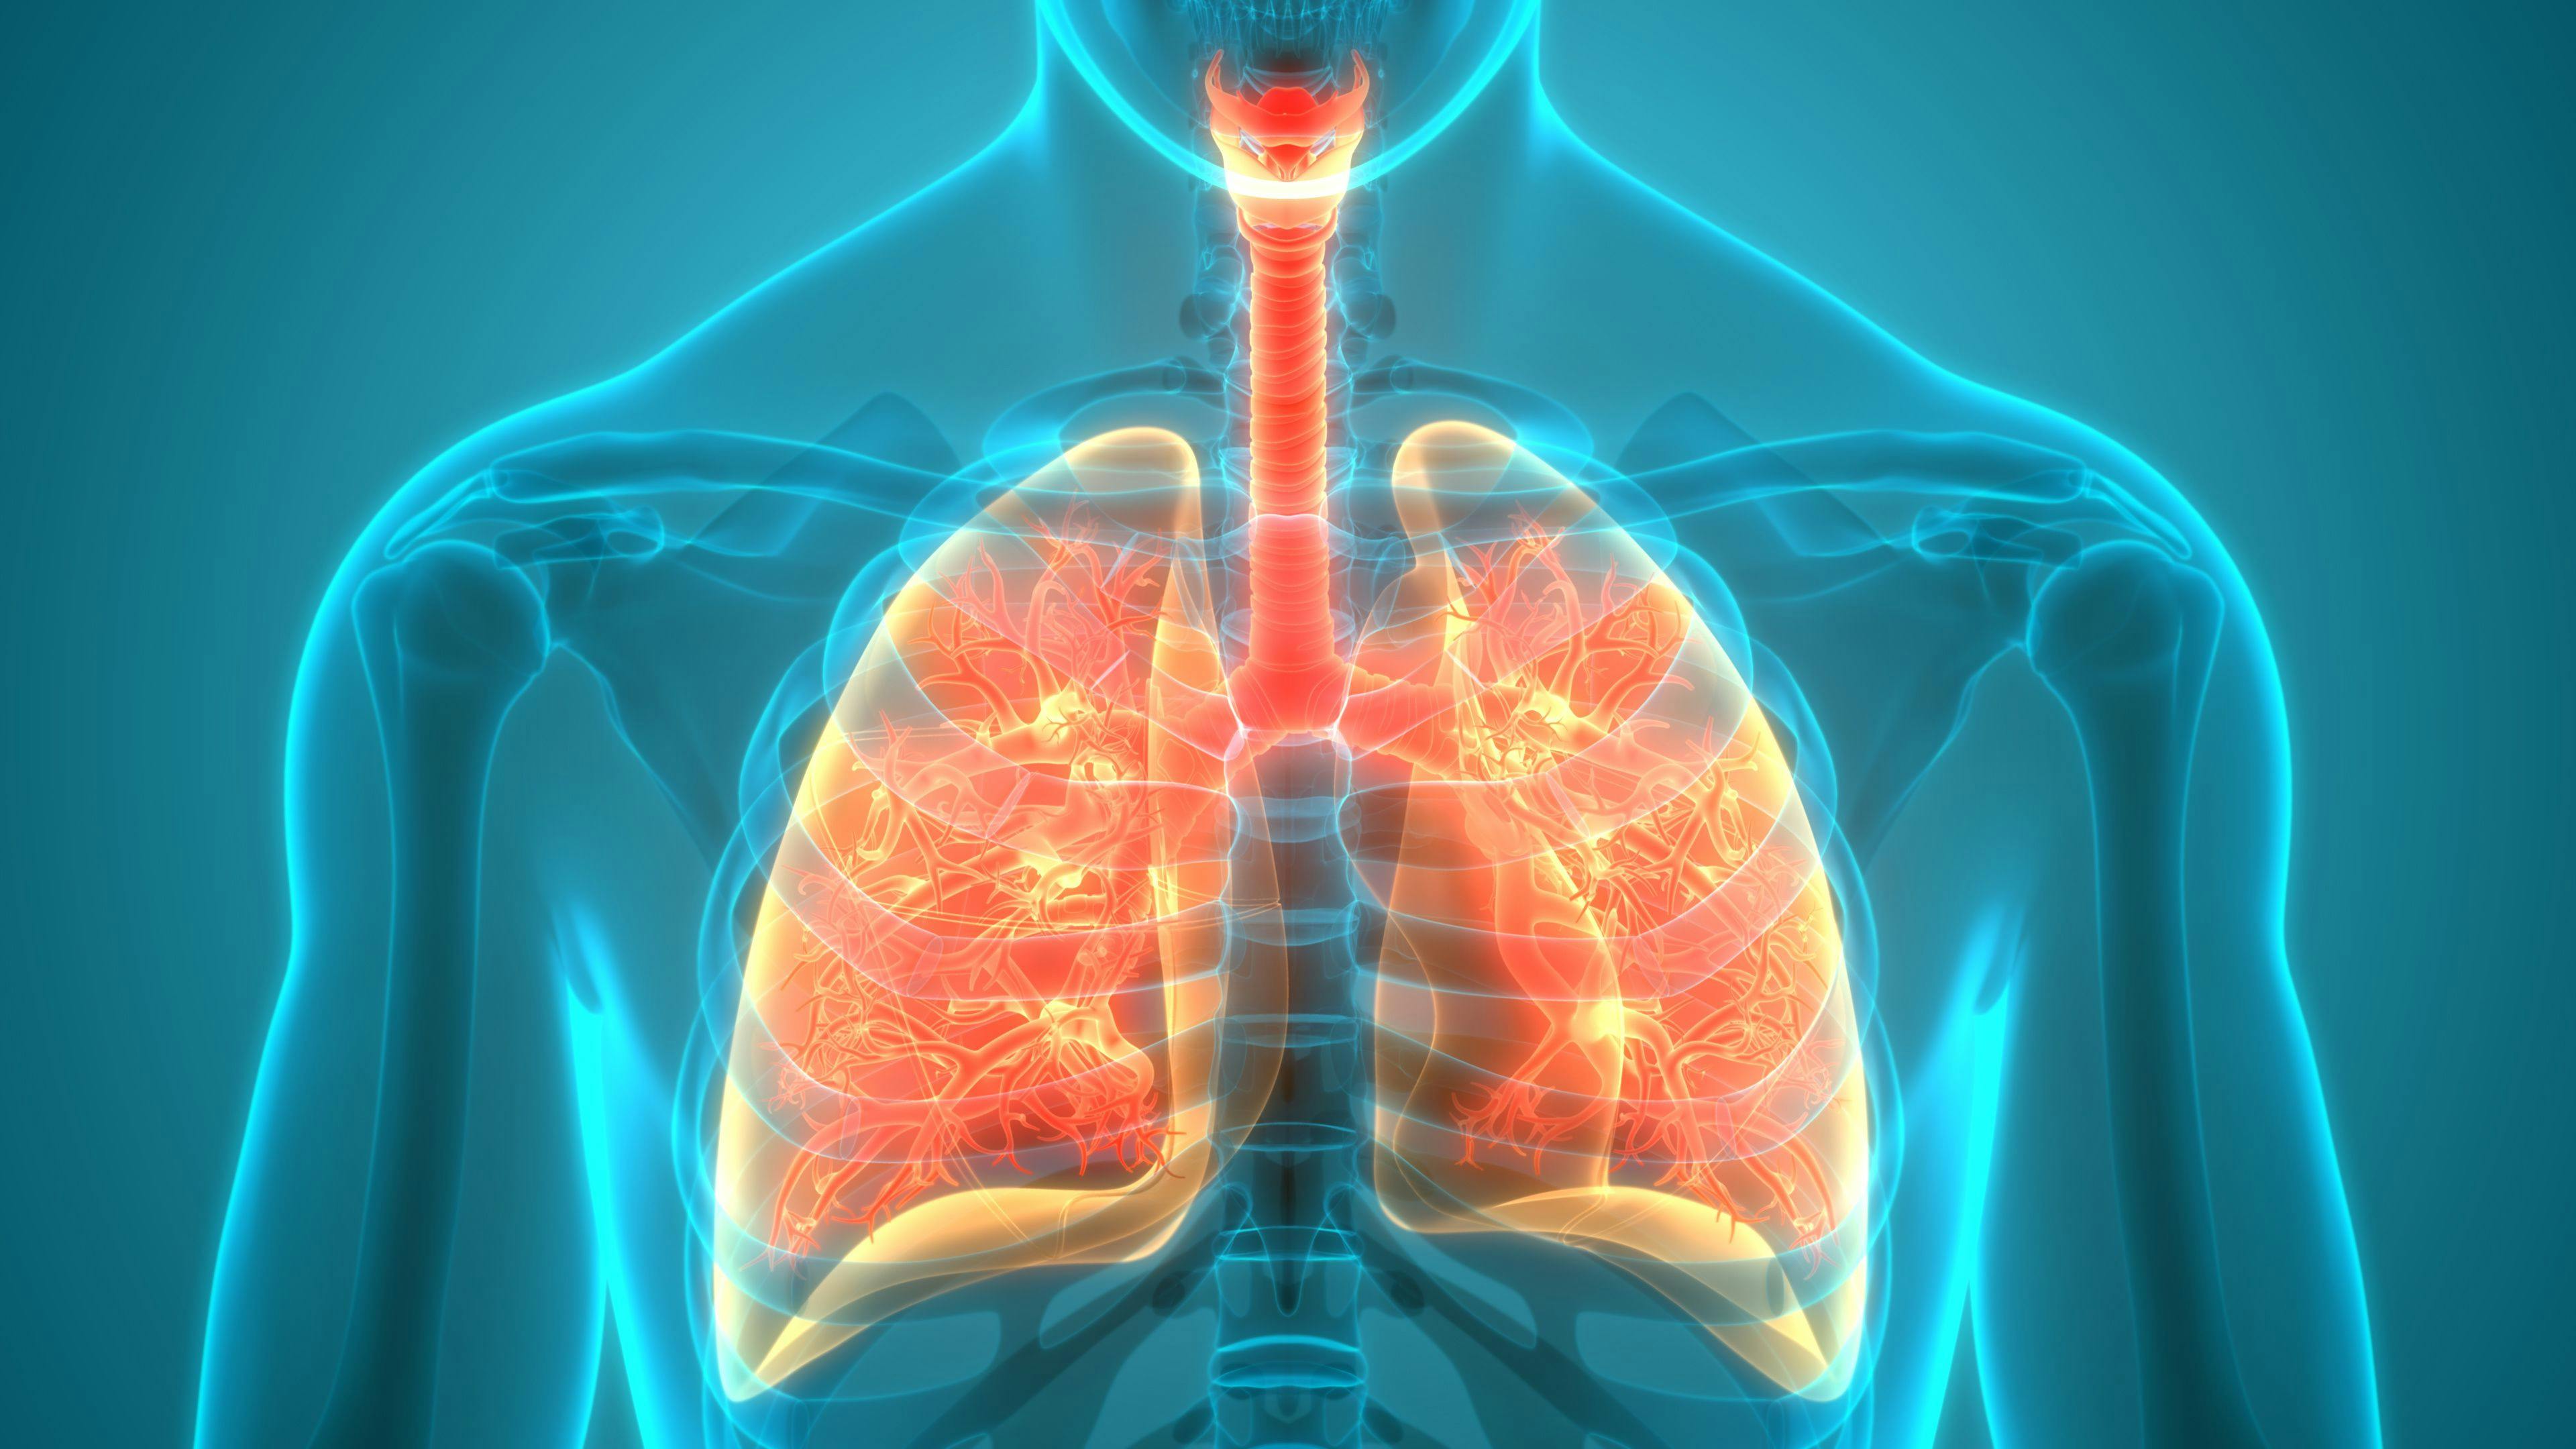 Long-lasting duration of response and prolonged survival were observed following treatment with MEDI15752 vs pembrolizumab (Keytruda) among patients with treatment-naïve nonsquamous non–small cell lung cancer (NSCLC), according to findings from a phase 1b/2 trial.